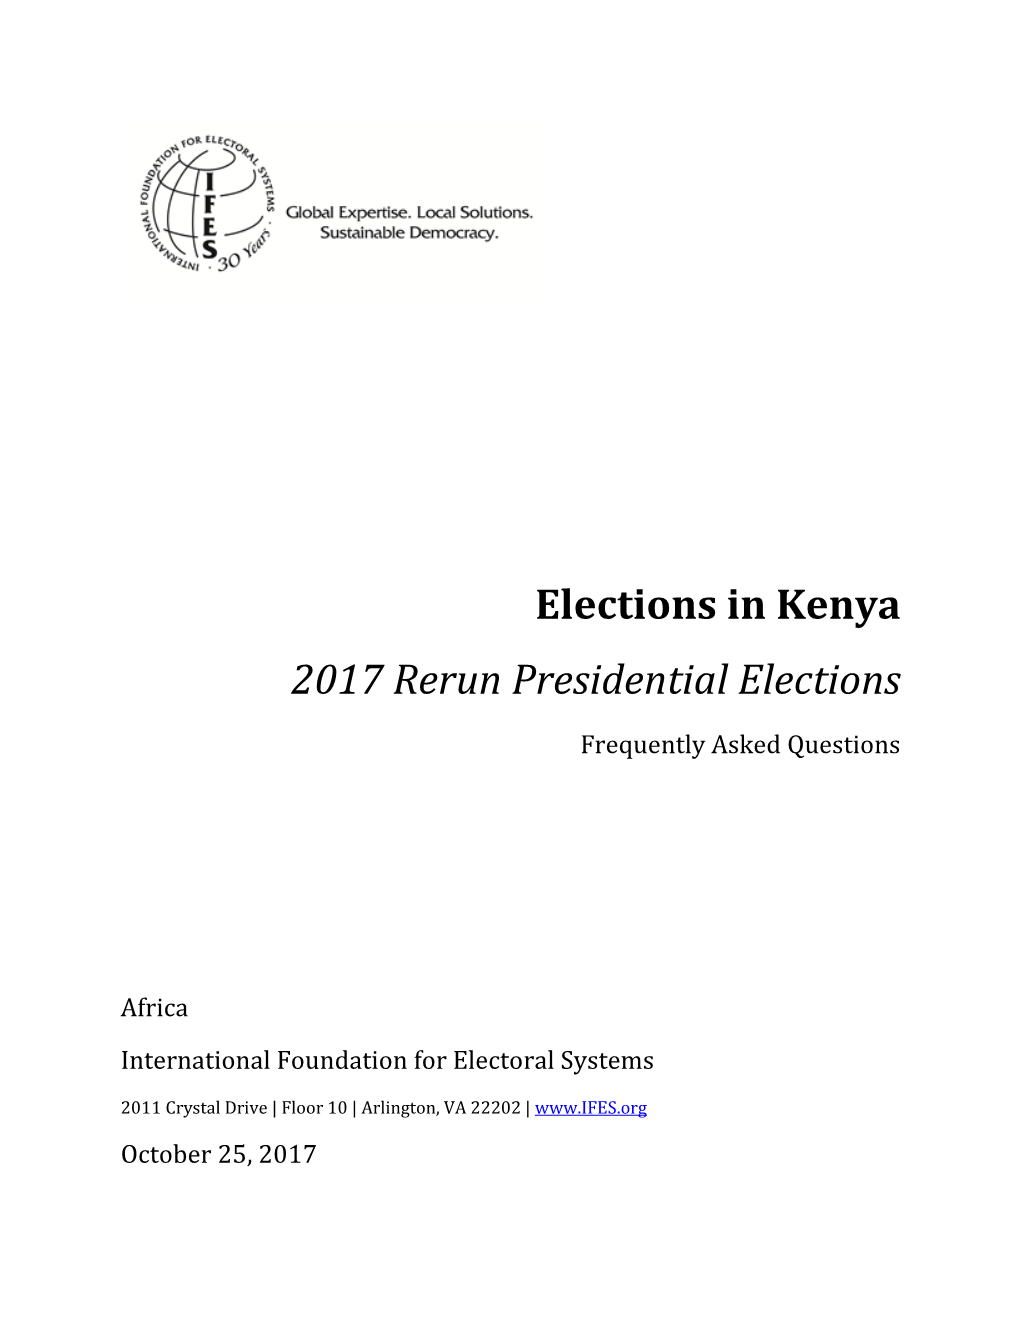 Elections in Kenya: 2017 Rerun Presidential Election Frequently Asked Questions